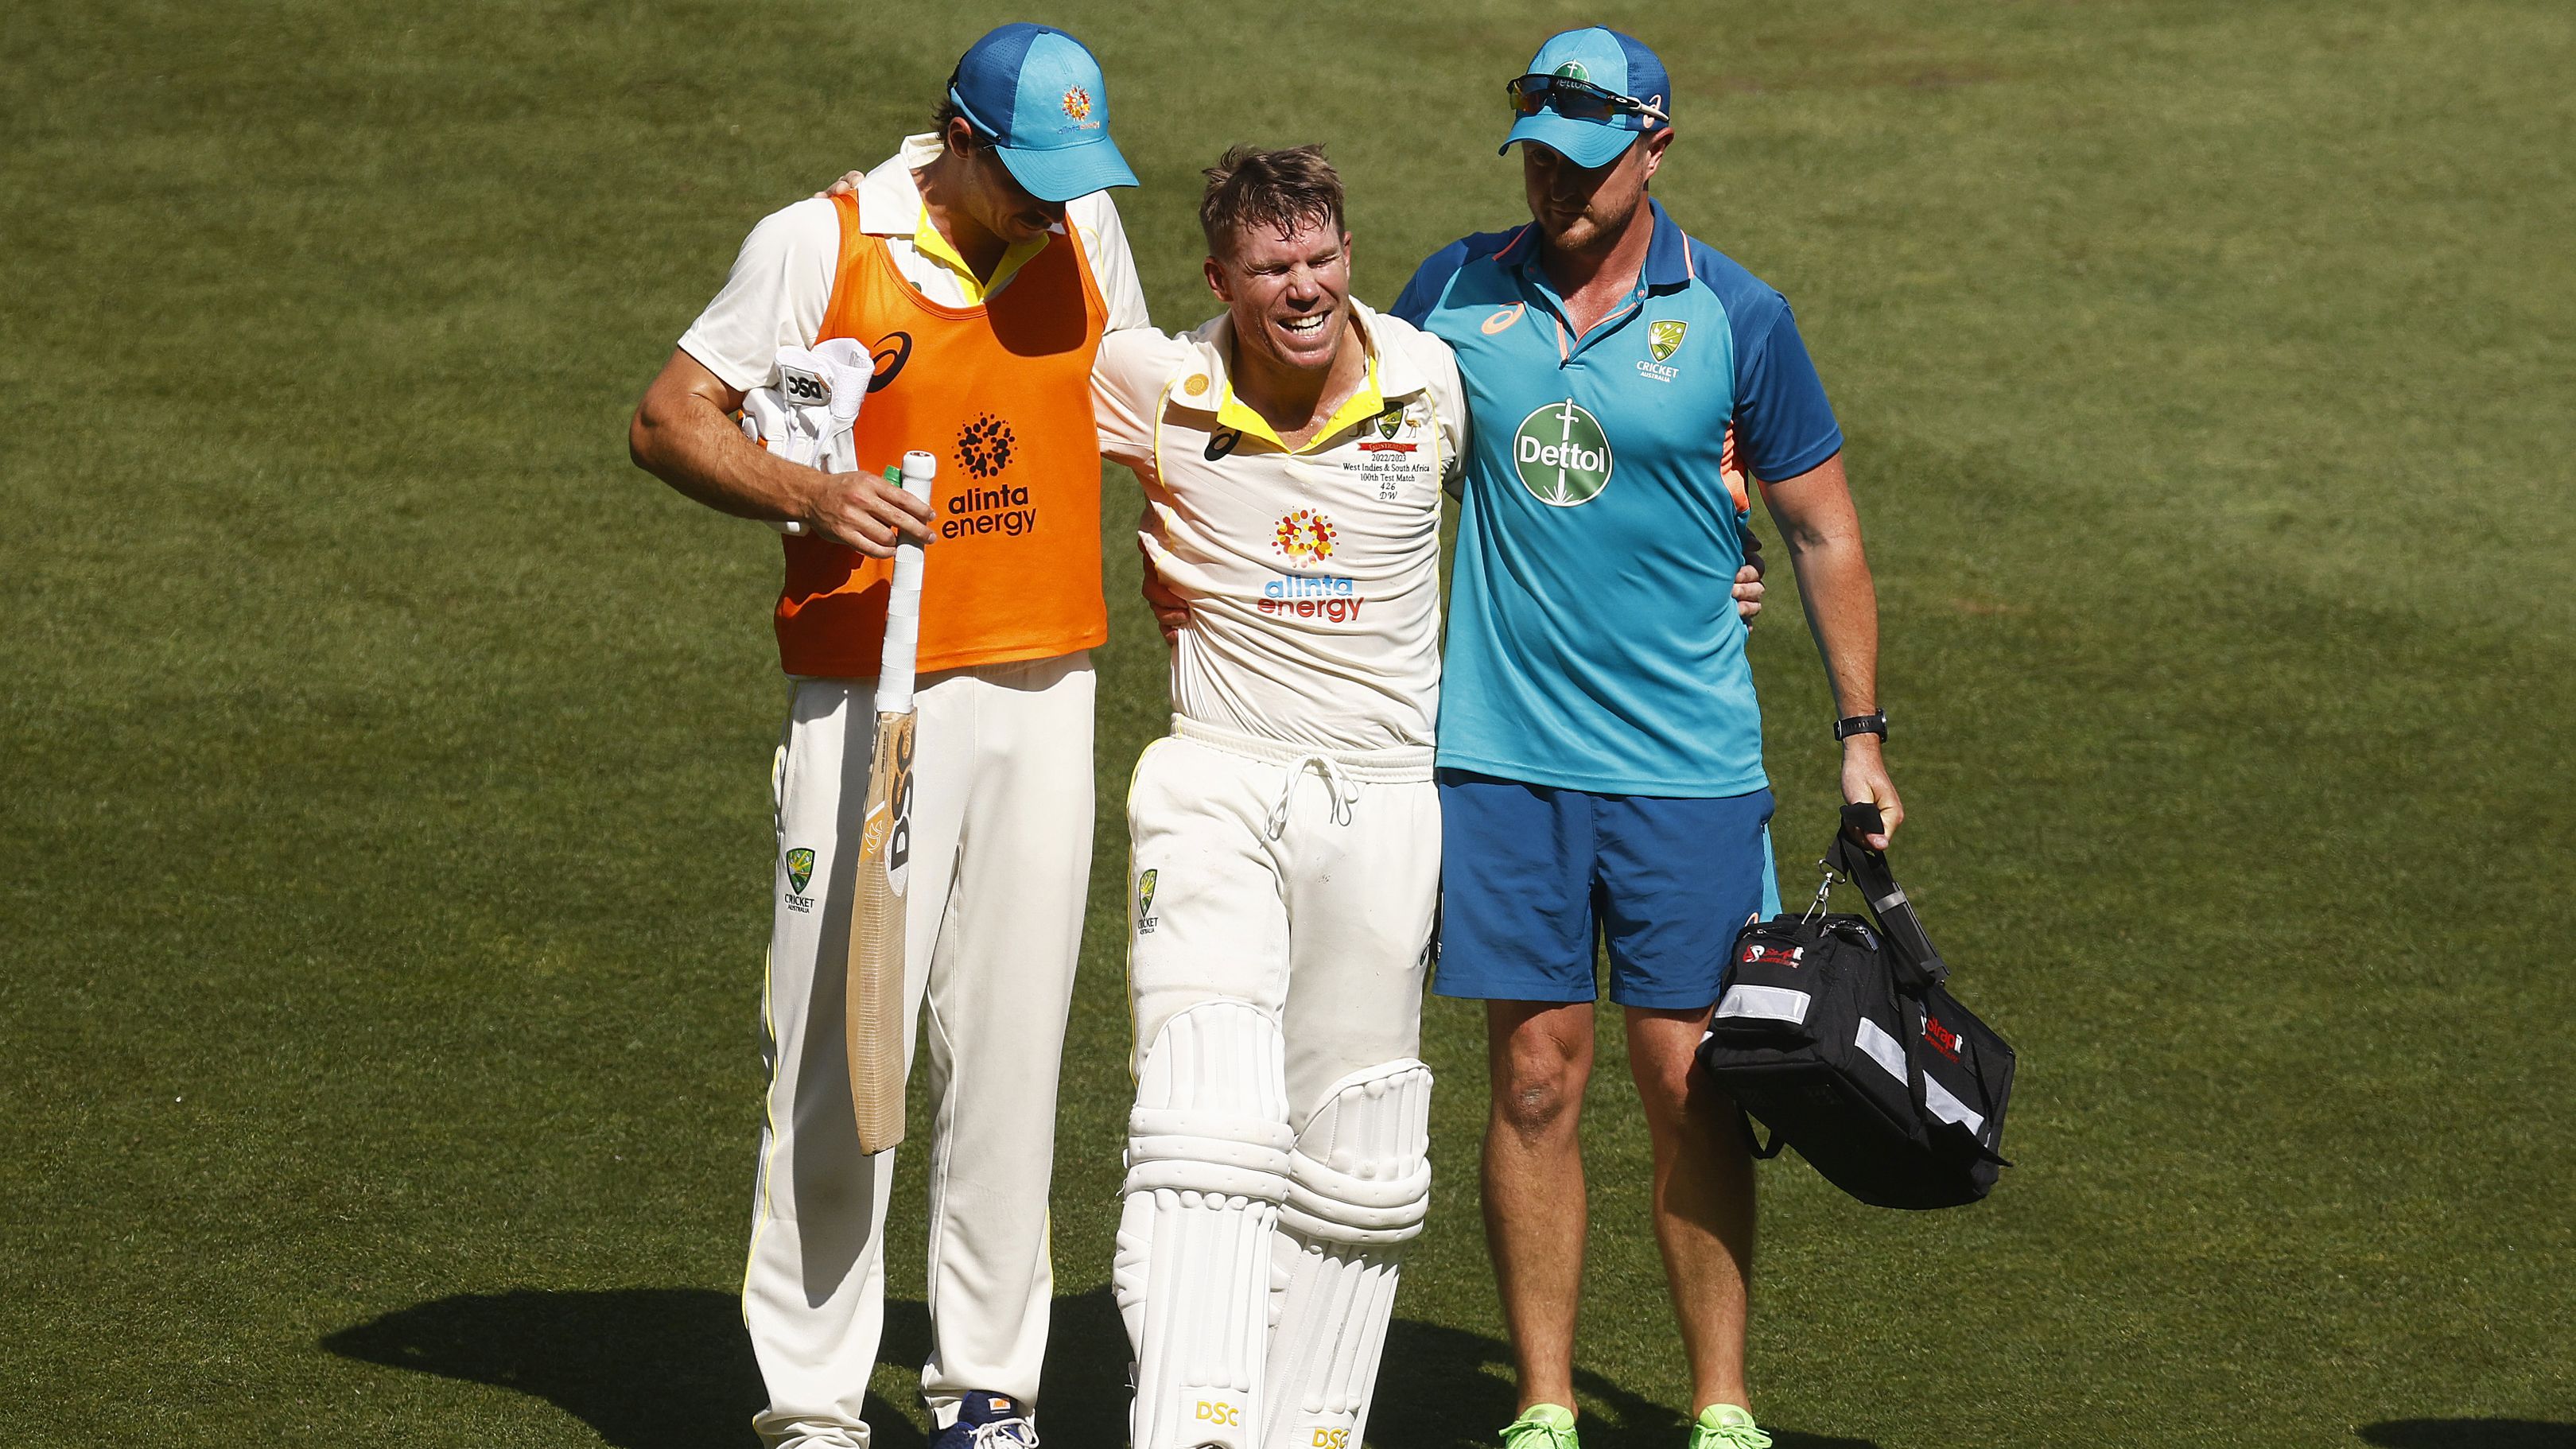 David Warner of Australia leaves the field injured after celebrating his double century. (Photo by Daniel Pockett - CA/Cricket Australia via Getty Images)